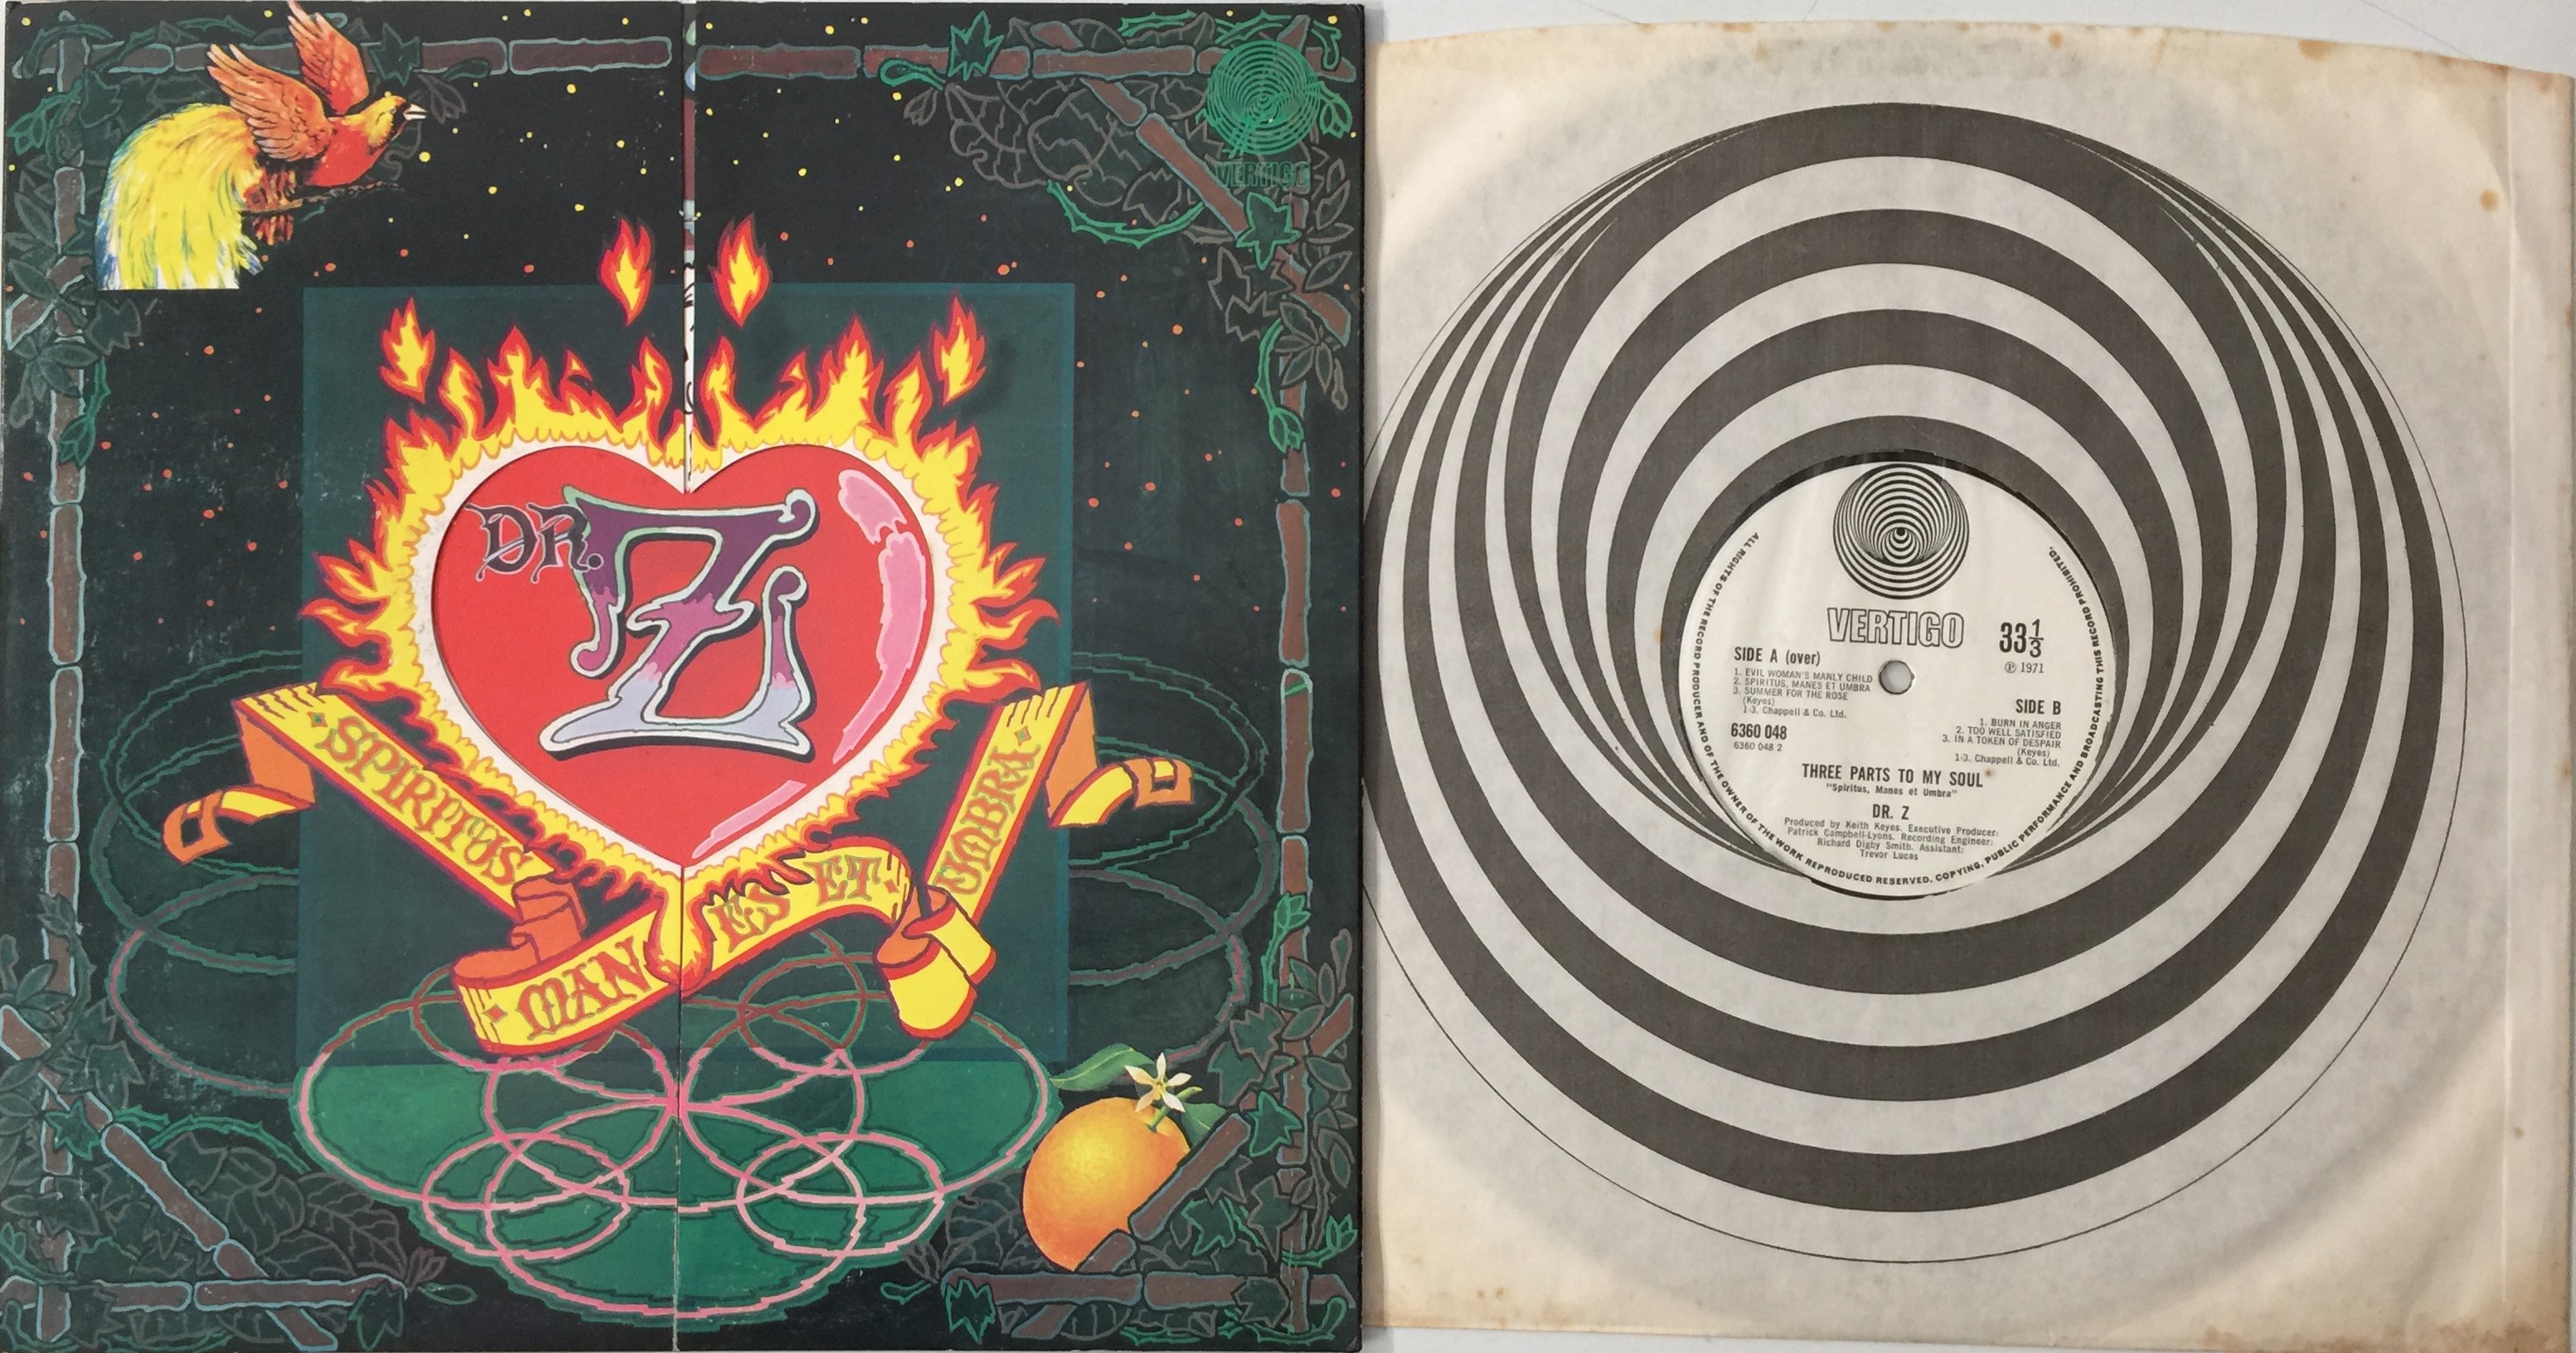 Lot 338 - DR Z. - THREE PARTS TO MY SOUL (ORIGINAL